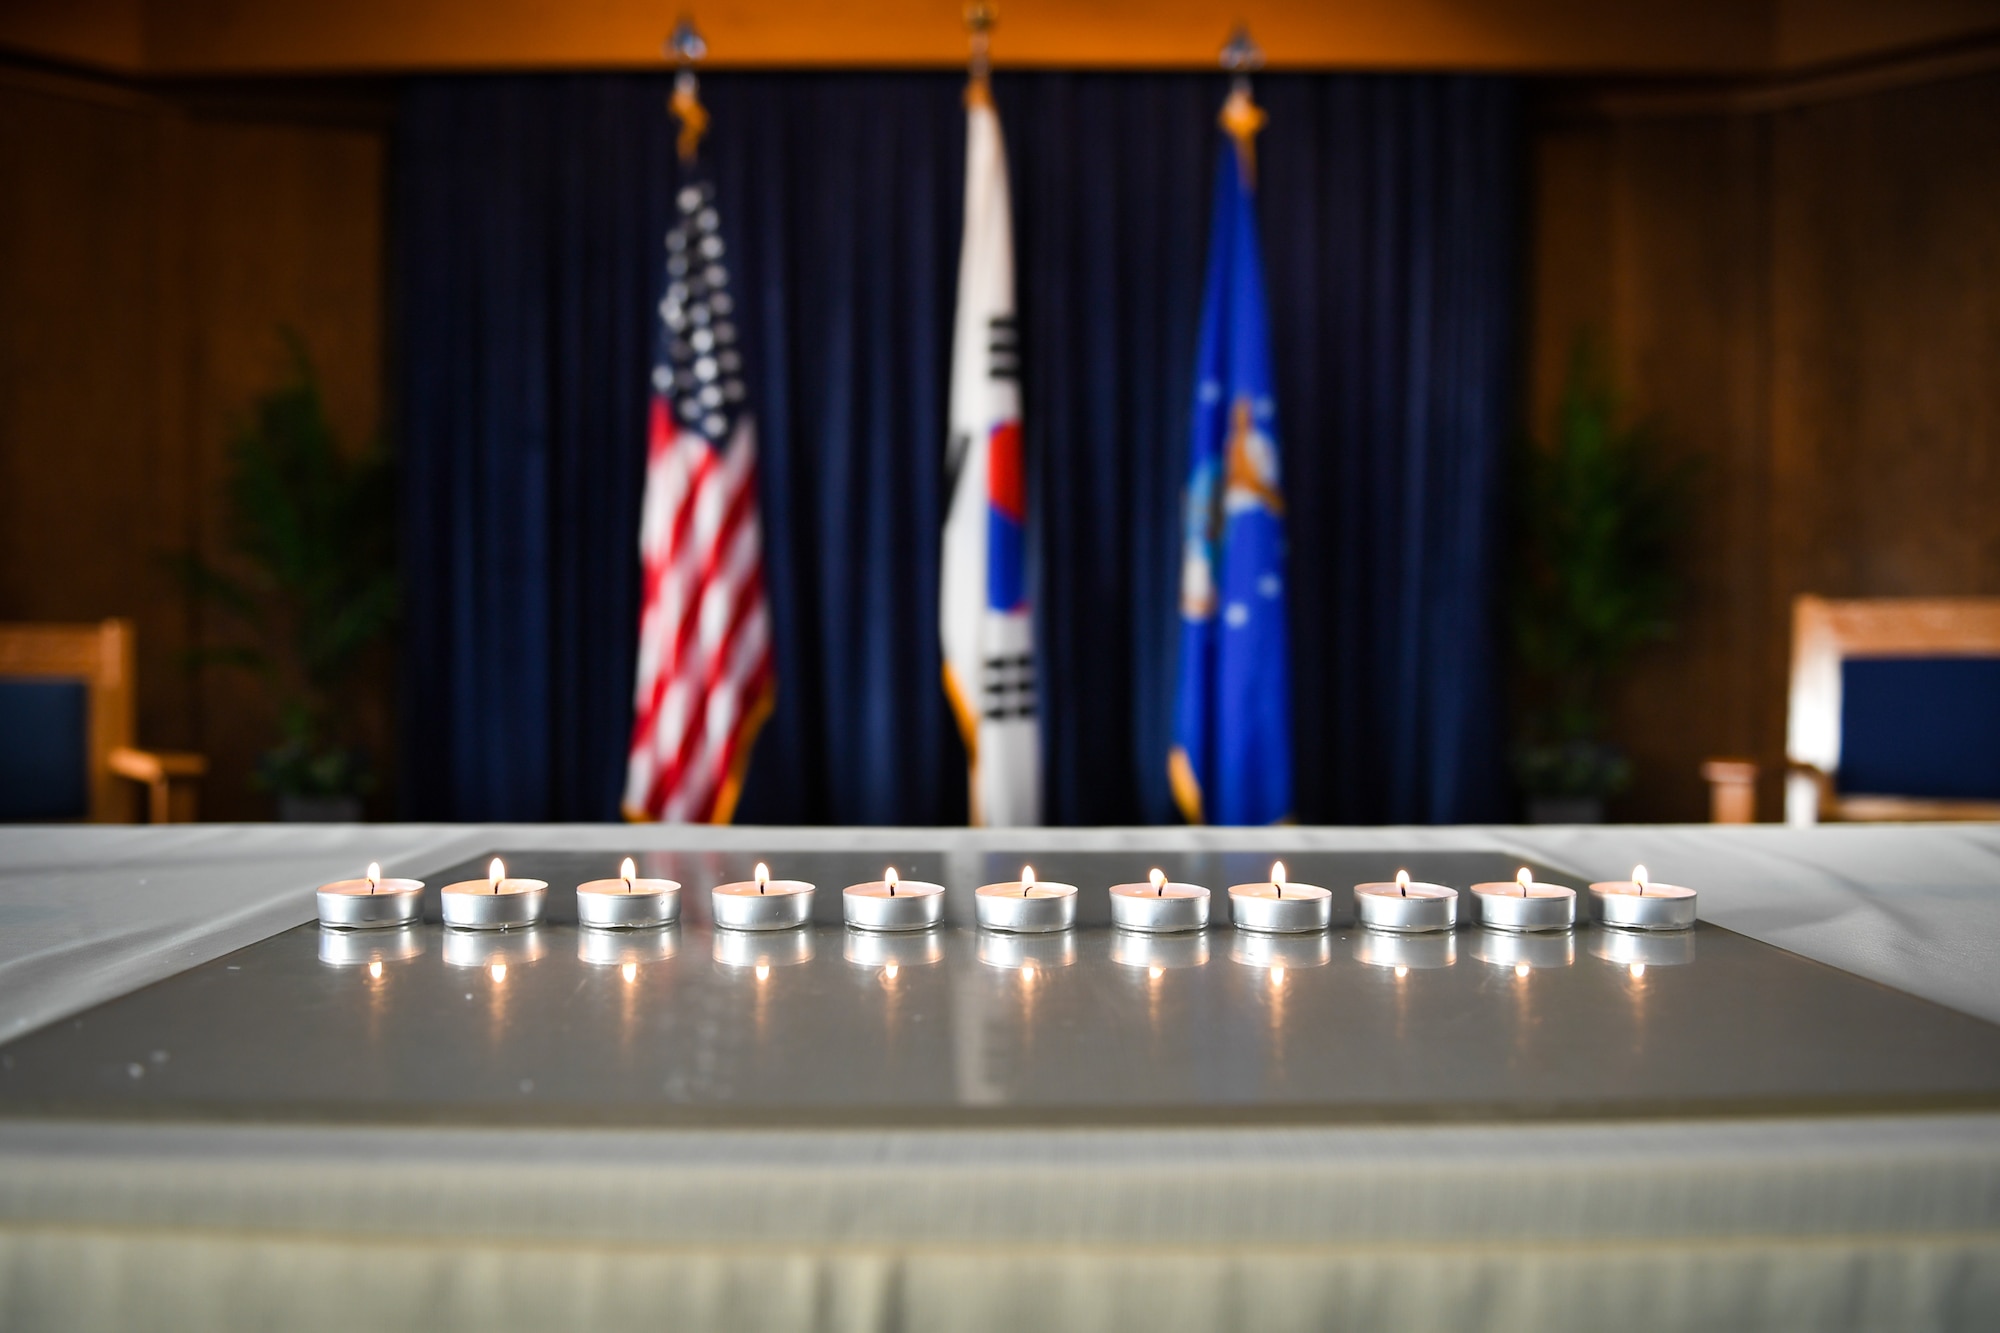 Eleven candles are lit and displayed during a remembrance service on Osan Air Base, April 12, 2018. The candles represent 11 million people murdered by Germany's Nazi regime between 1933 and 1945. From April 9 to 13, 2018, the base hosted an opening ceremony, a film screening of Conspiracy, a 5K run, and a remembrance service held at the chapel (U.S. Air Force photo by Staff Sgt. Benjamin Raughton)